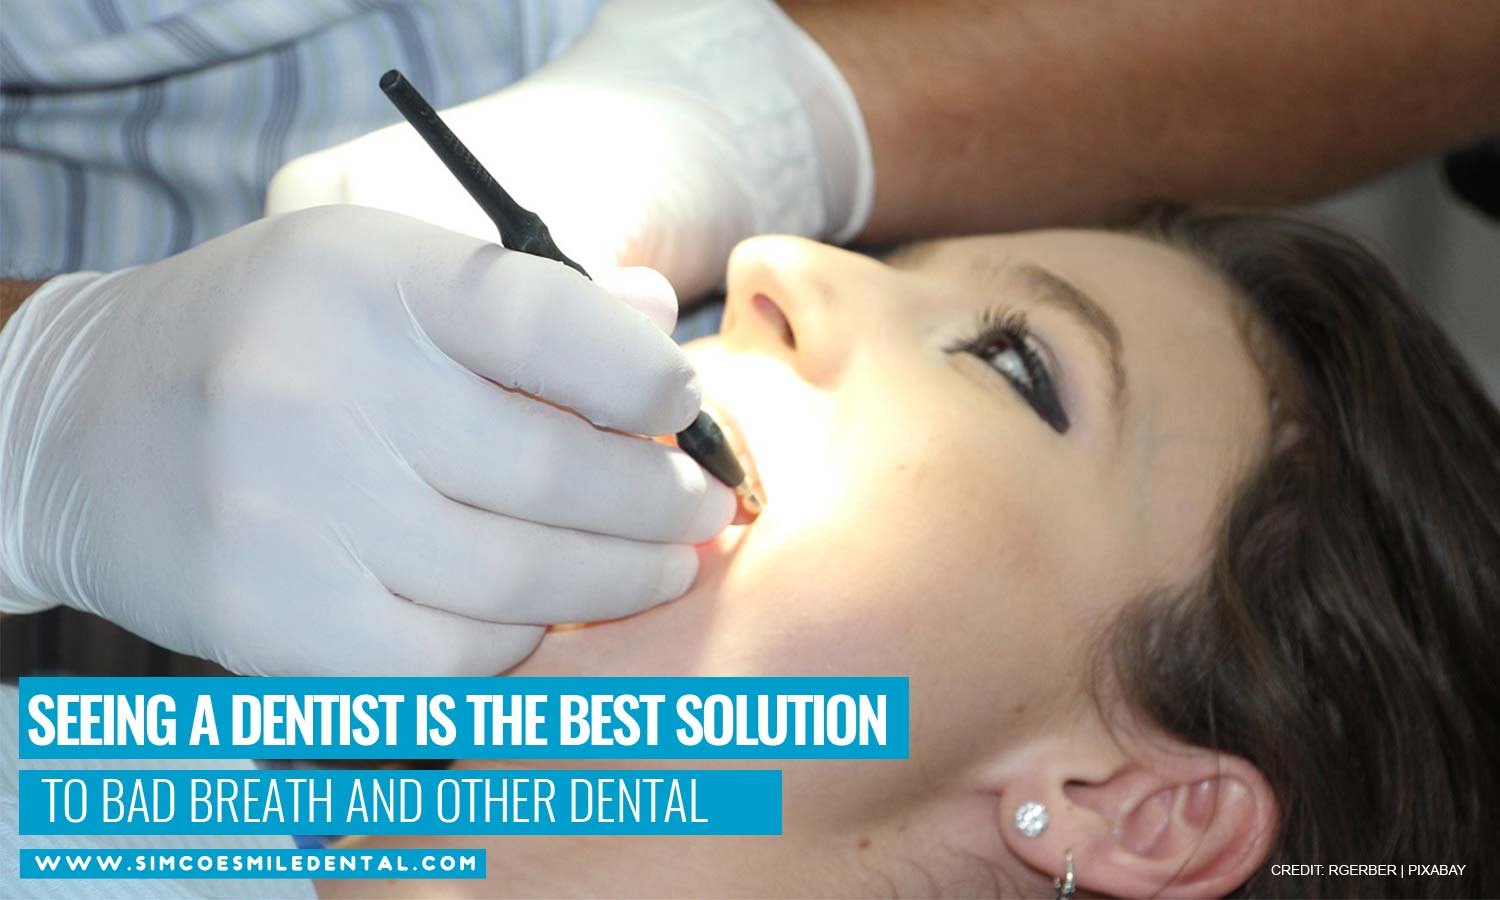 Seeing a dentist is the best solution to bad breath and other dental conditions